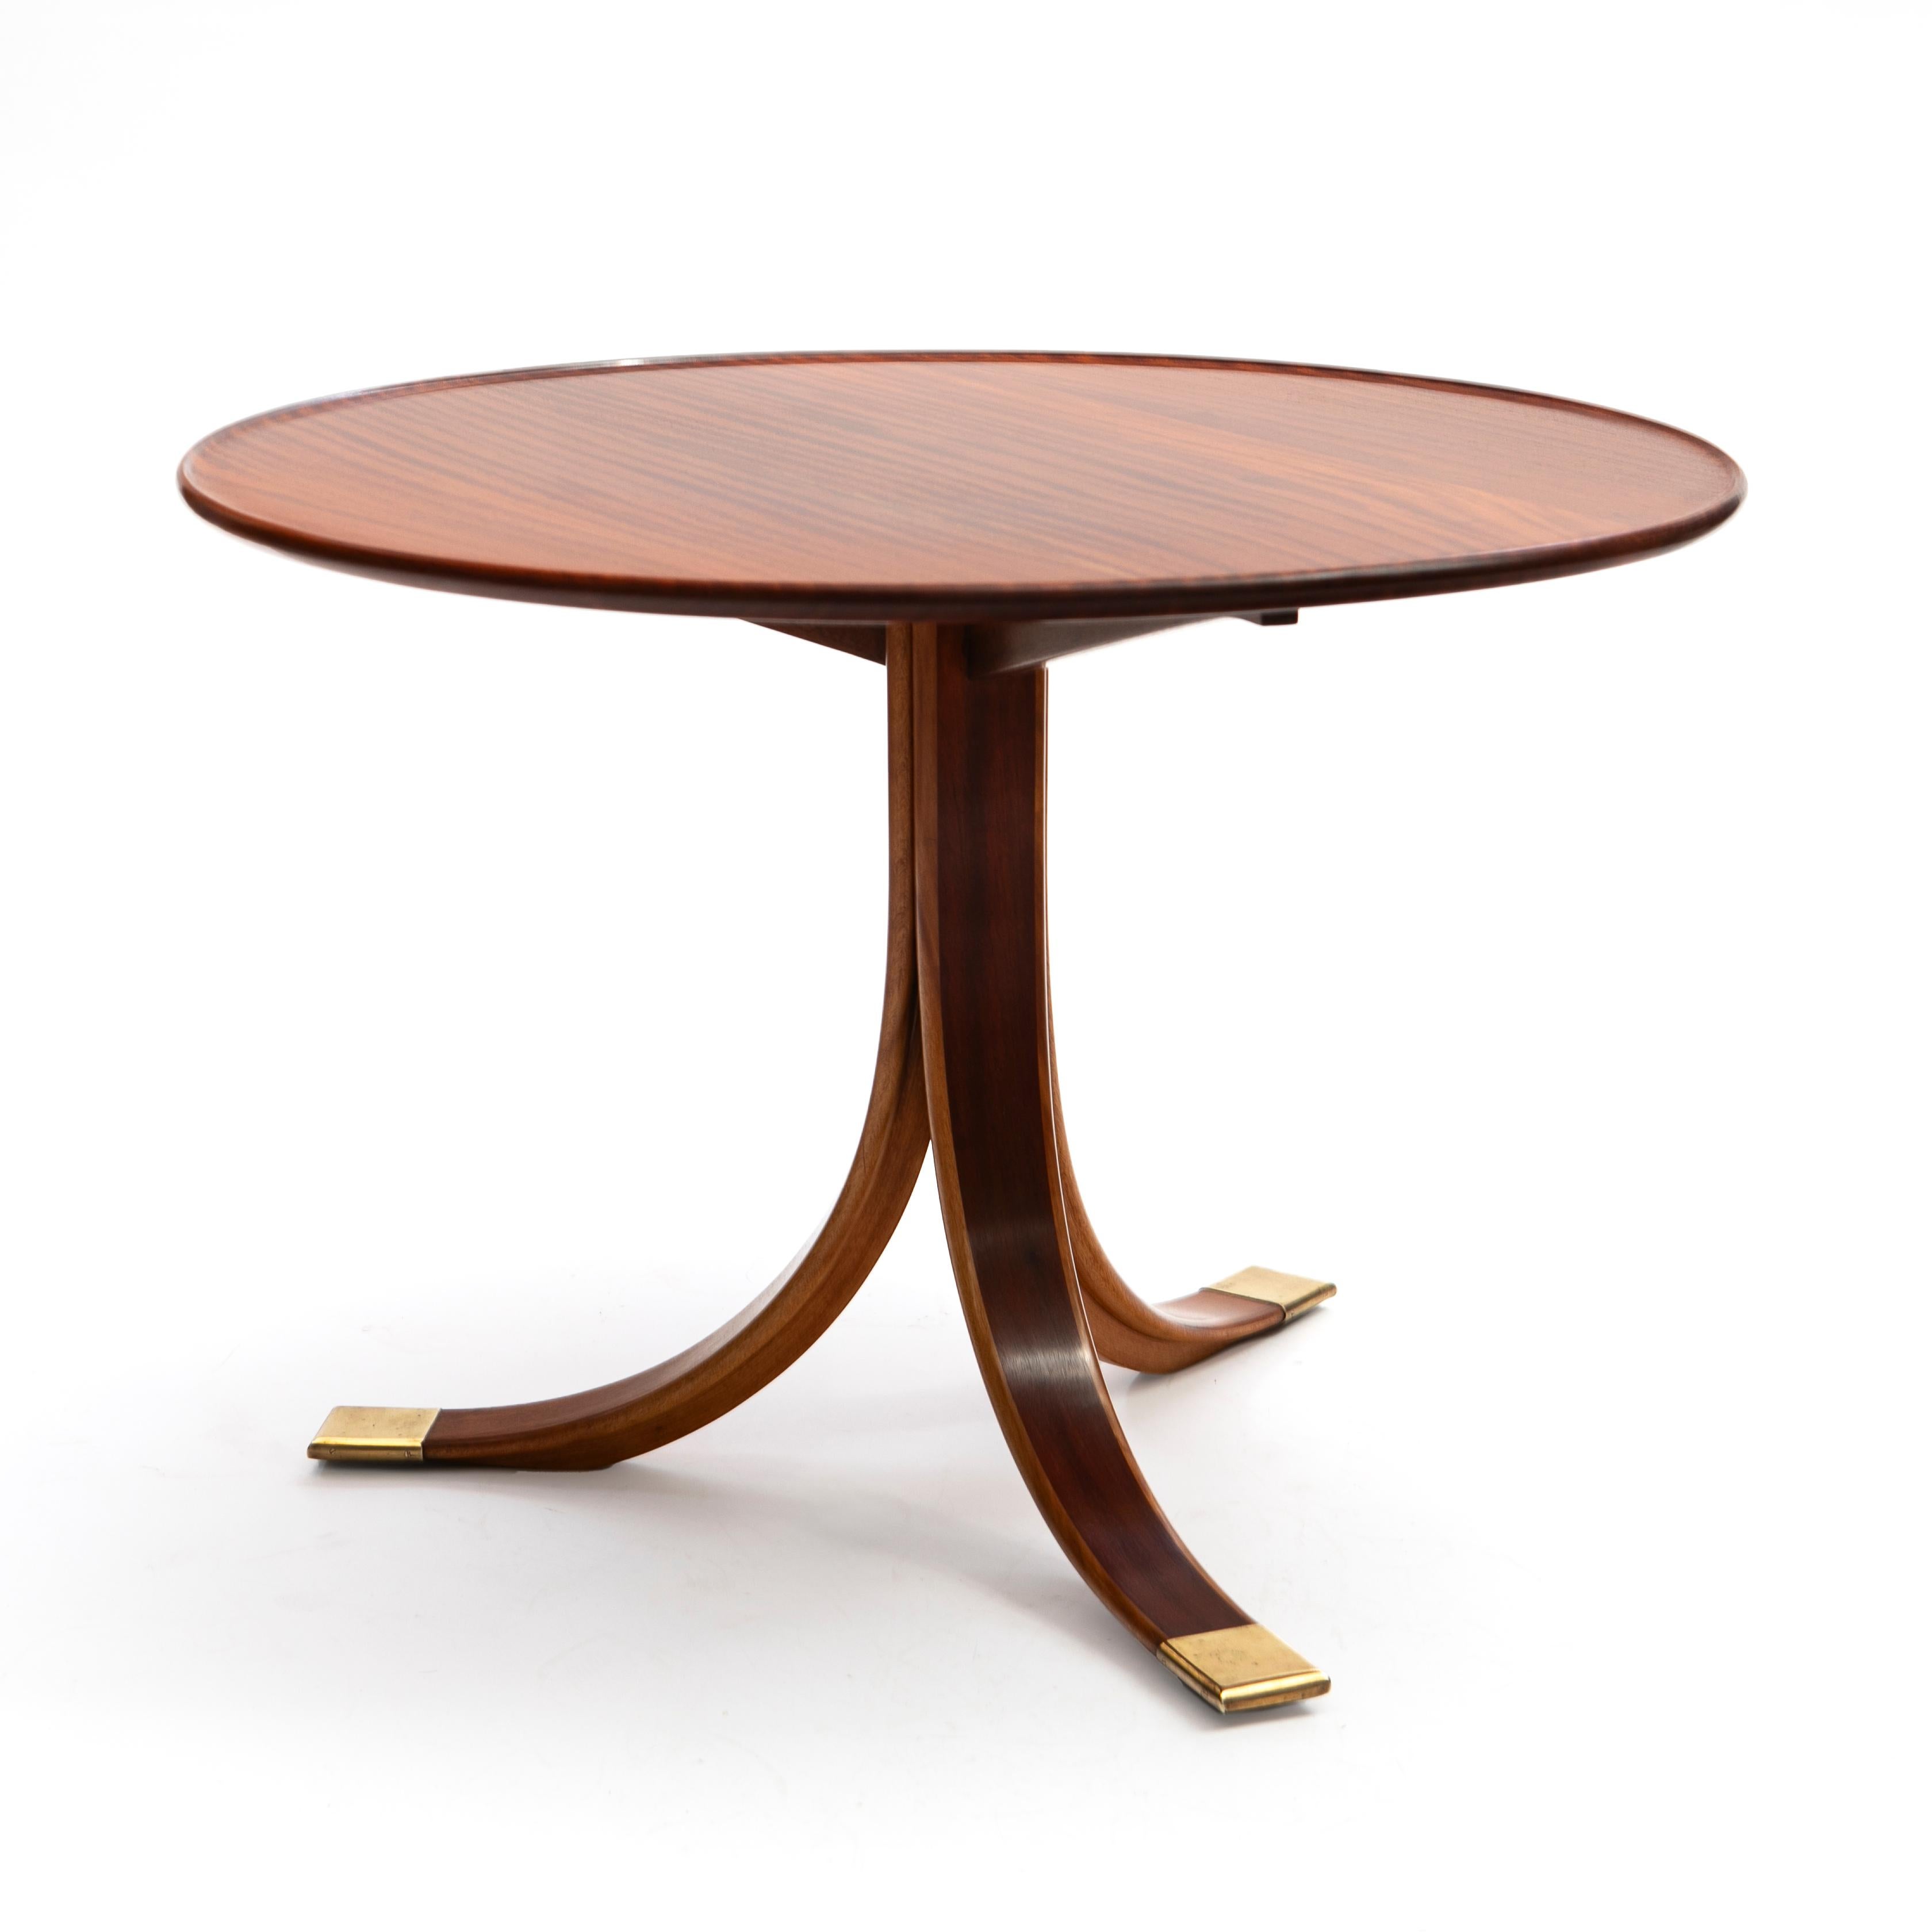 Frits Henningsen 1889-1965.
Round pedestal coffee table in solid mahogany by designer and cabinetmaker Frits Henningsen.
Table top with fluted edge resting on tripod foot with maple wood inlays ending in brass shoes.
Designed and crafted in Frits